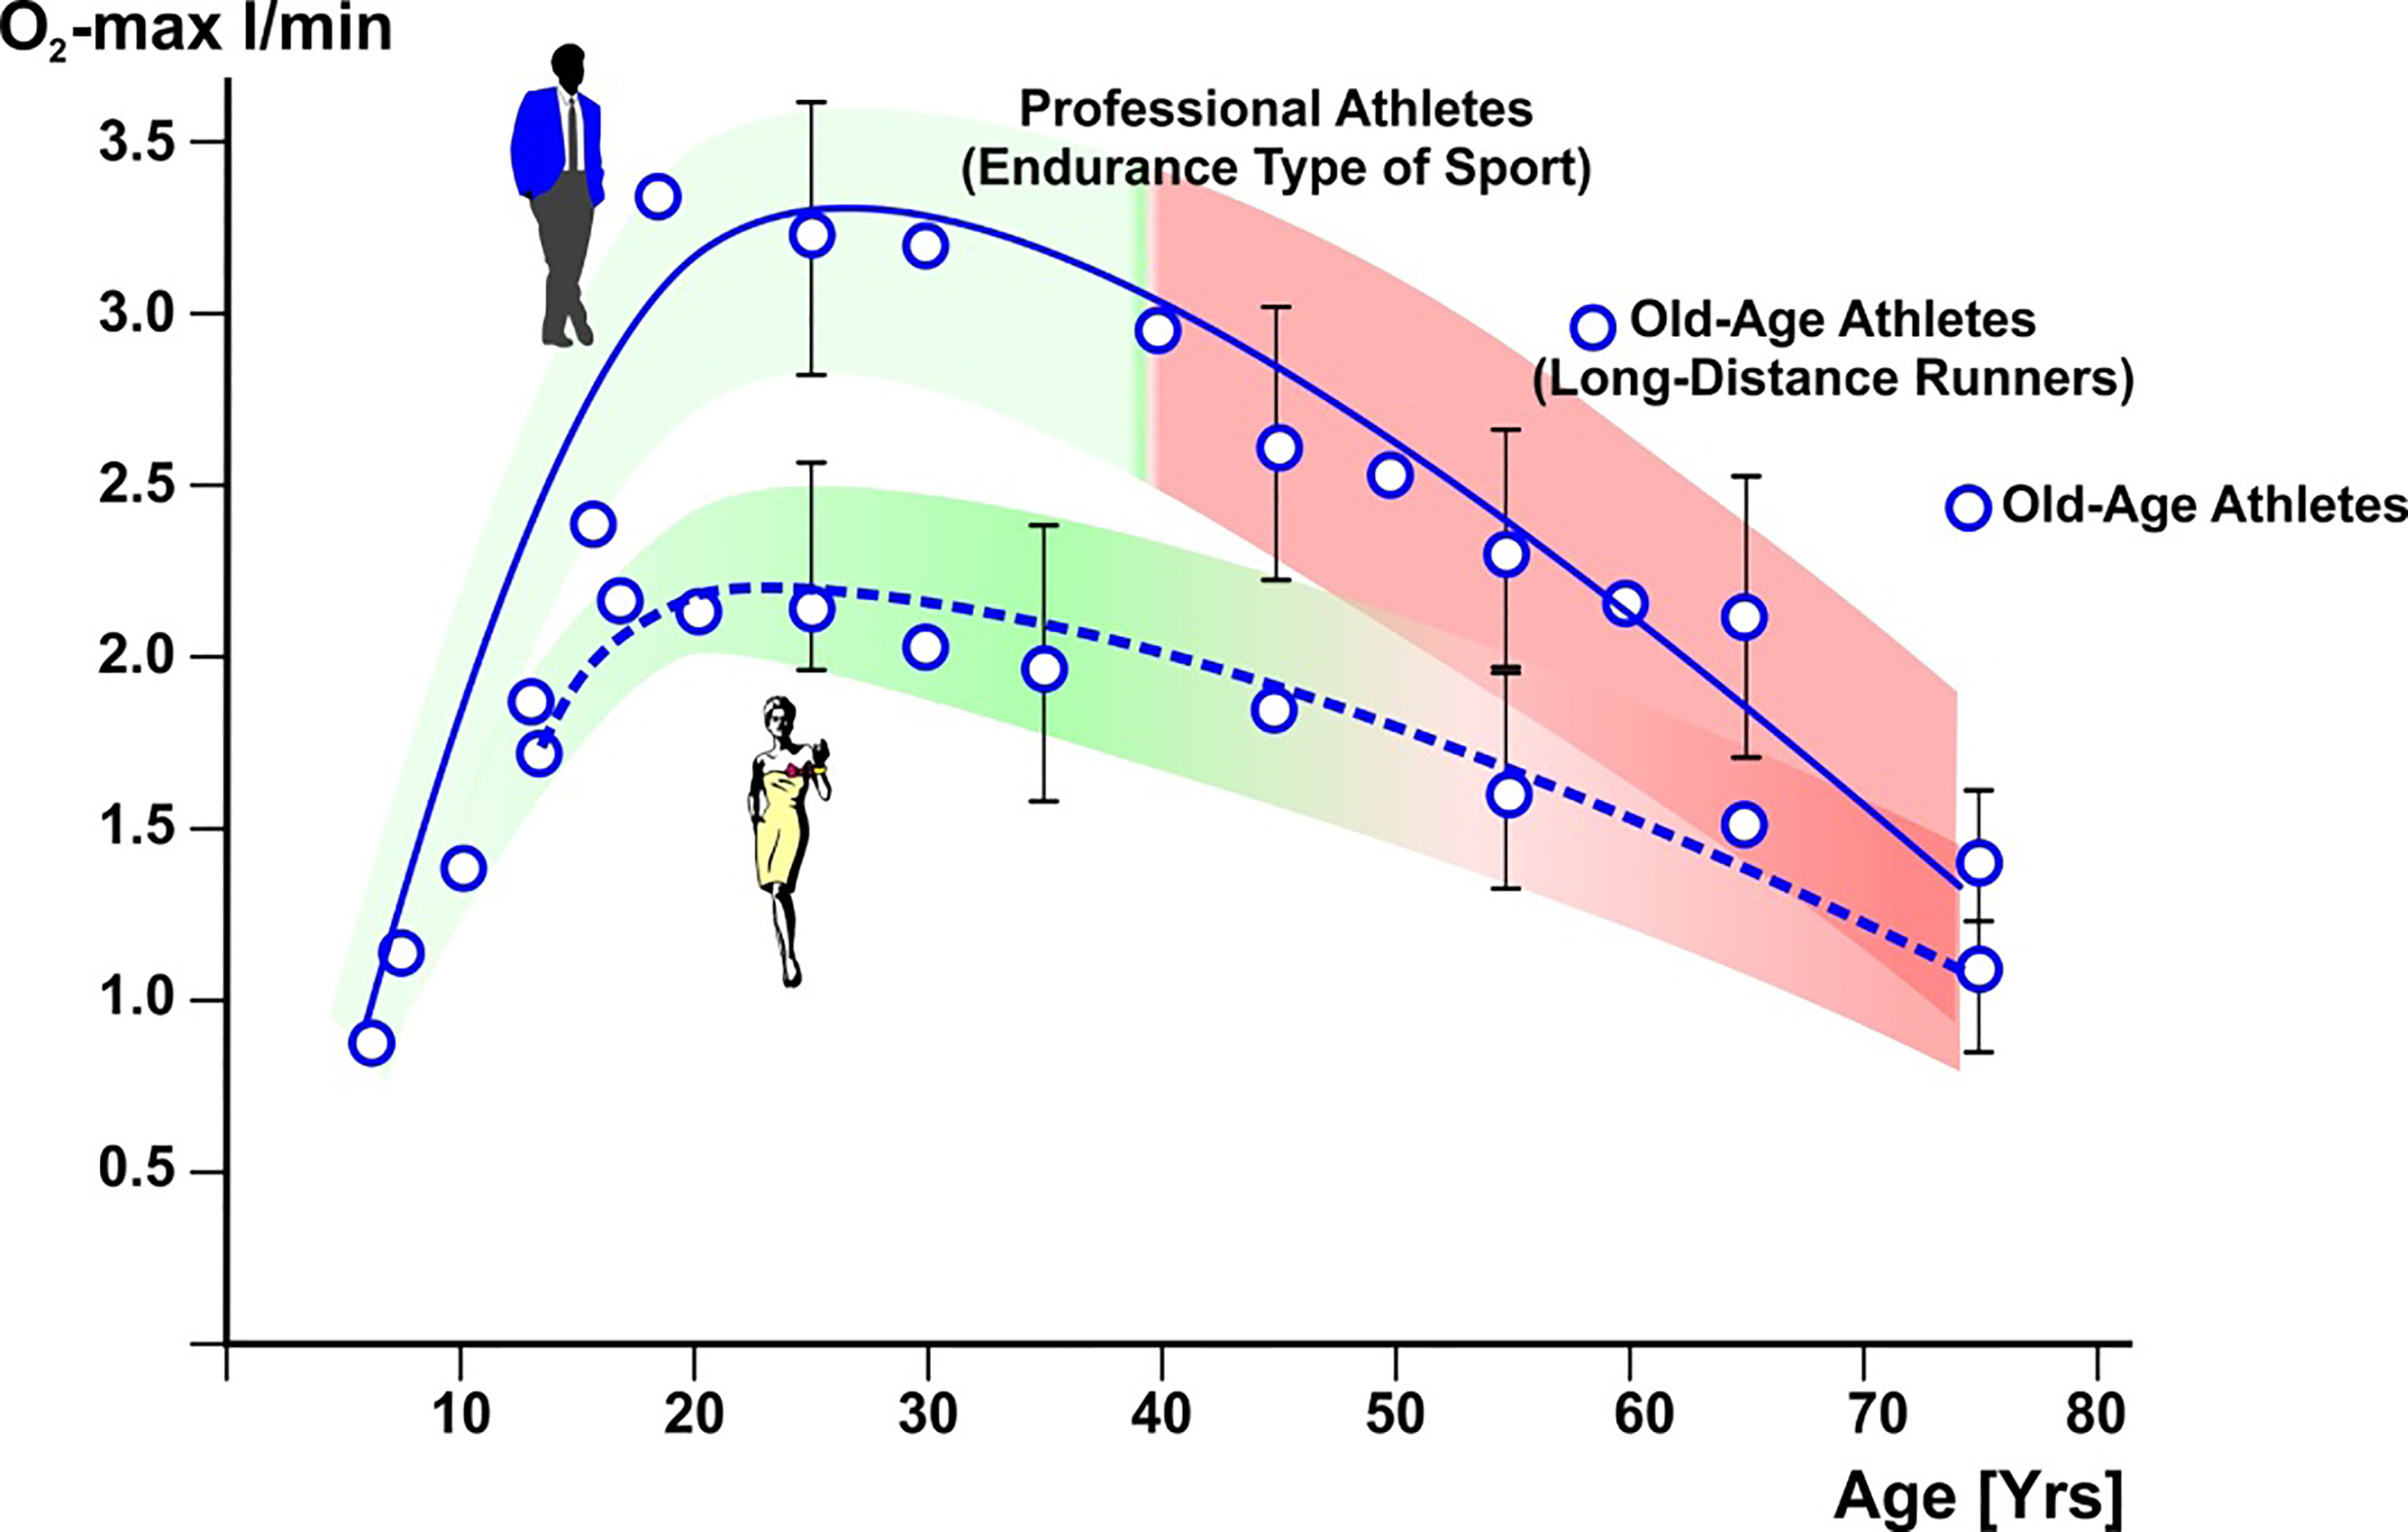 Maximum oxygen uptake of men and women in dependence on age. Means from 2334 subjects, according to Hollmann. Source [8].